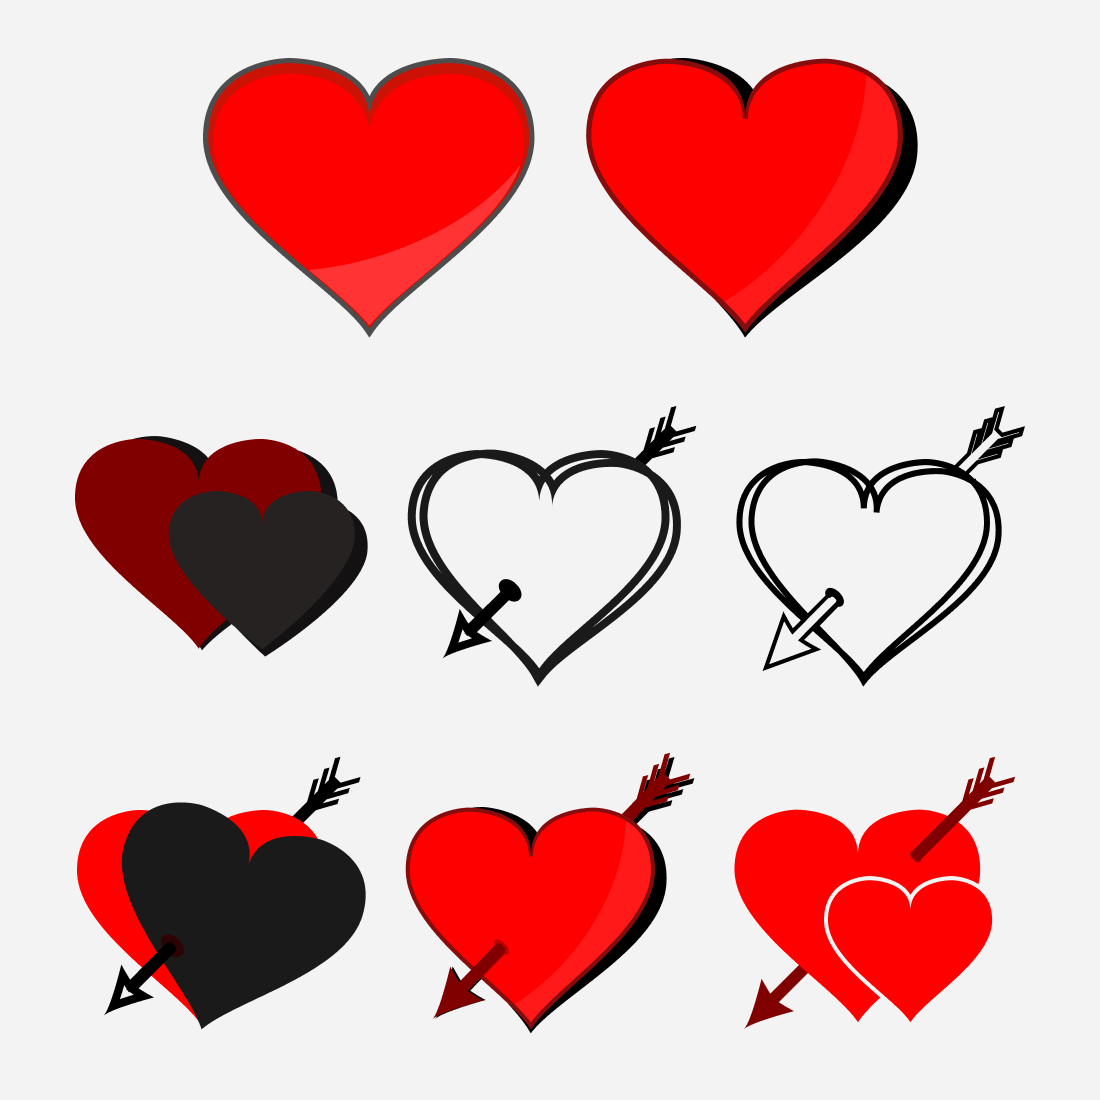 Hearts with and without a shadow, as well as with colored and transparent filling.